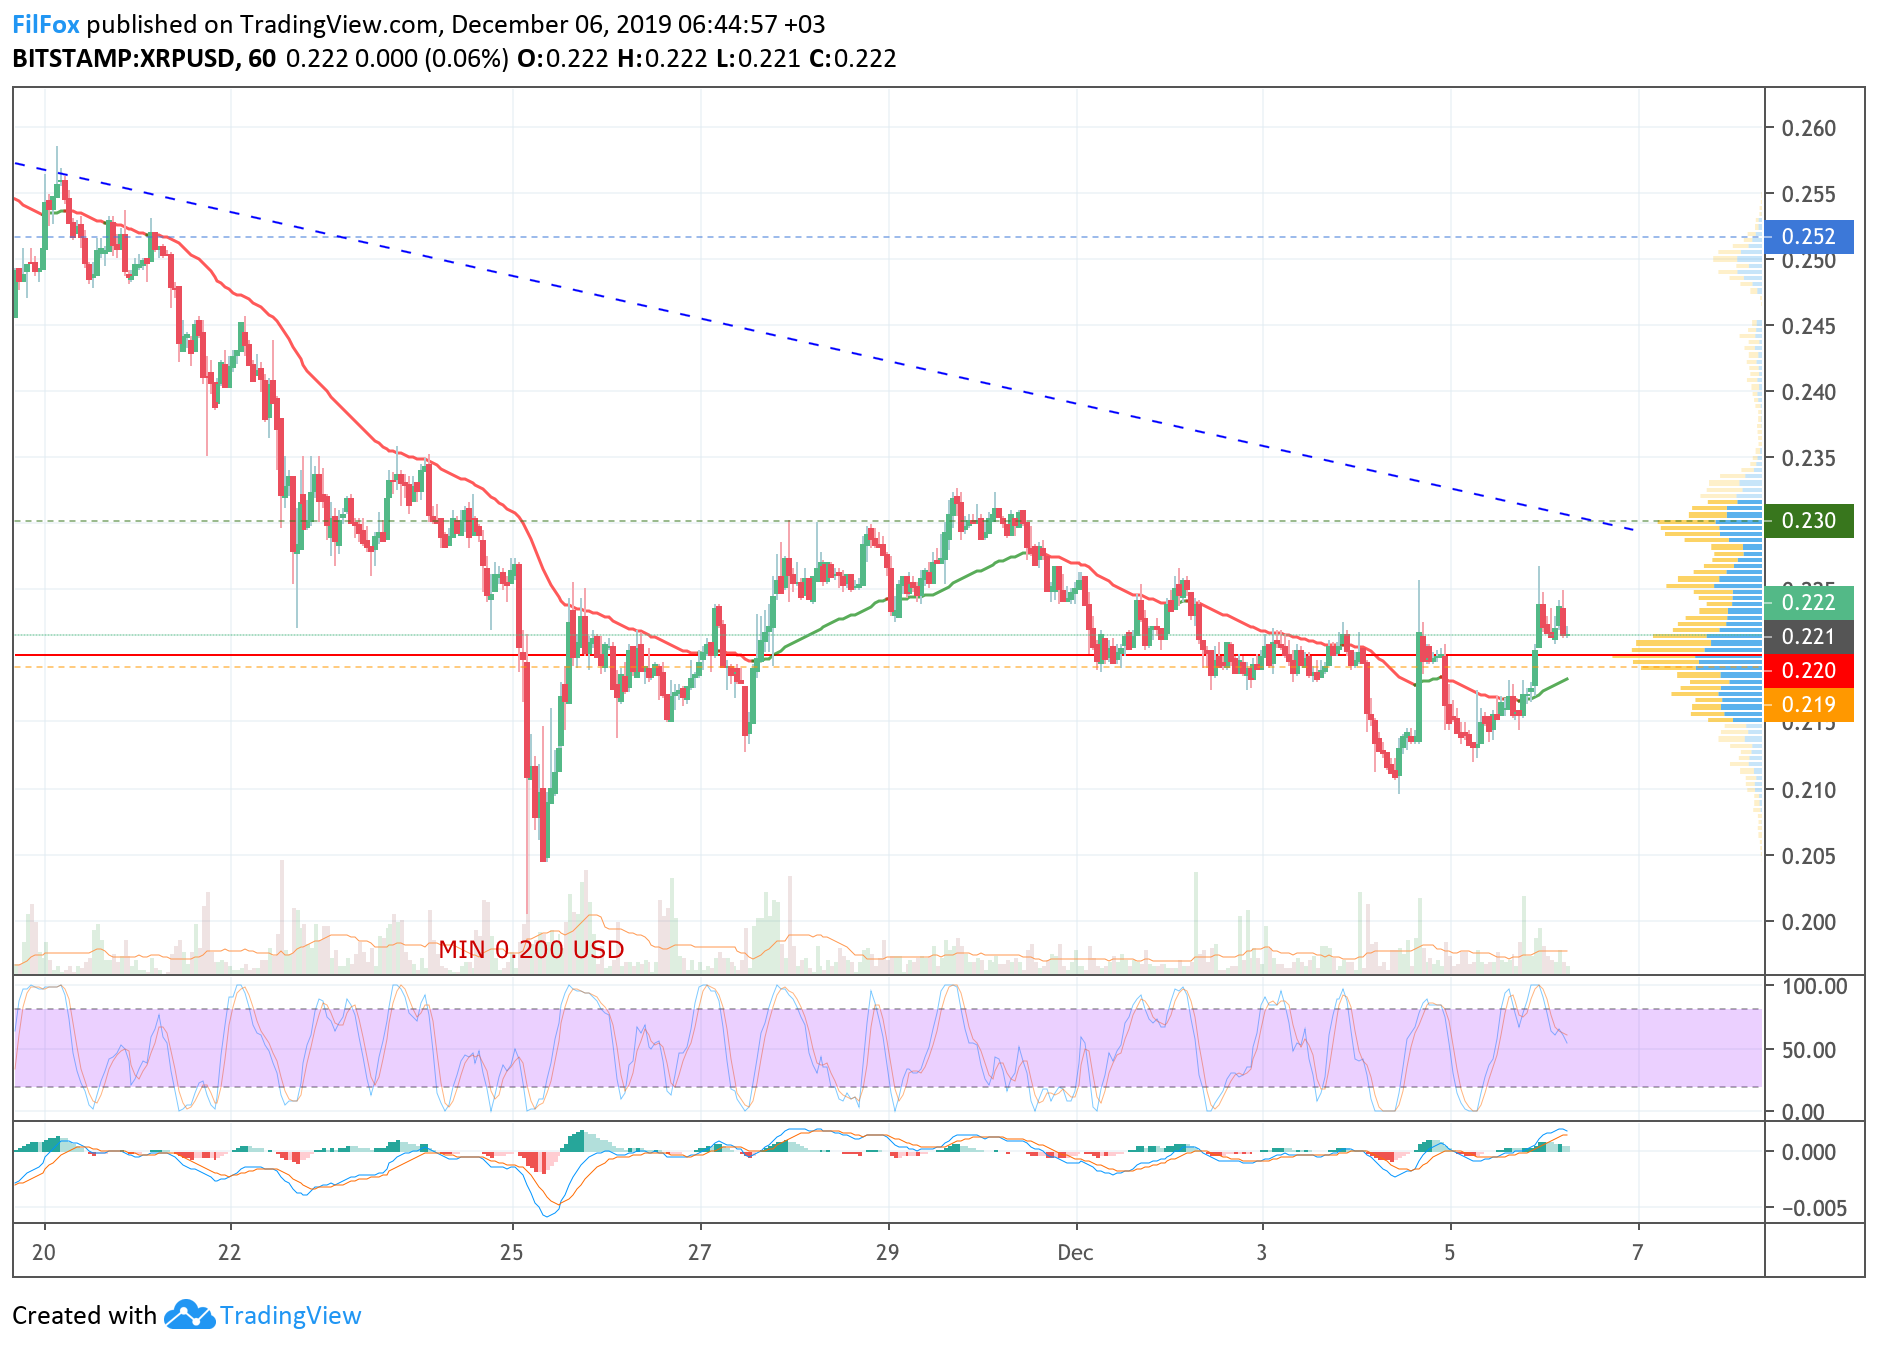 Analysis of cryptocurrency pairs BTC / USD, ETH / USD and XRP / USD on 12/06/2019